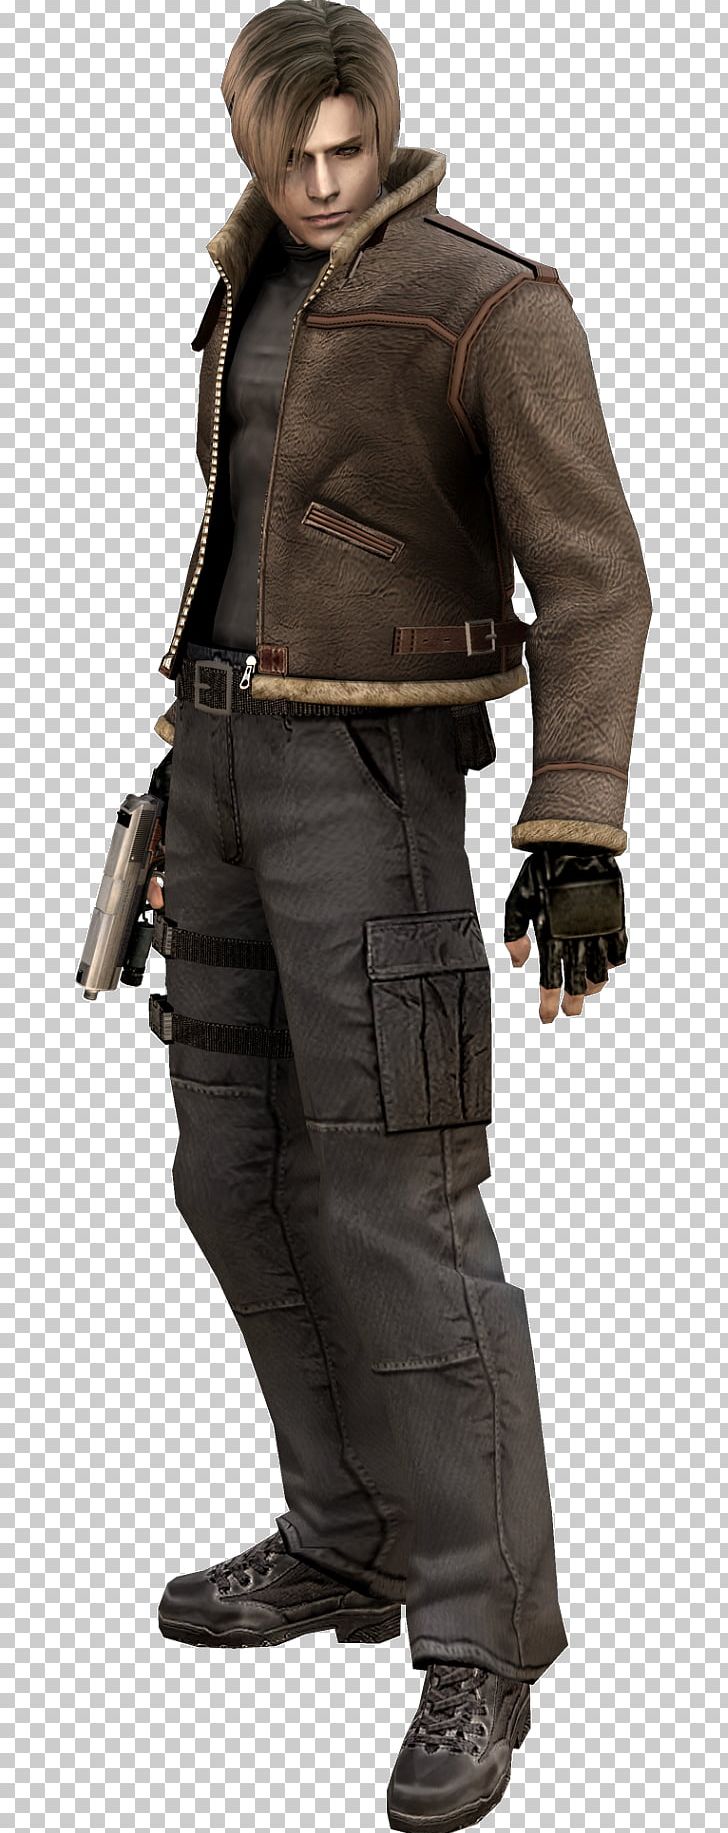 Leon S. Kennedy Resident Evil 4 Resident Evil 2 Resident Evil 6 PNG, Clipart, Action Figure, Capcom, Character, Chris Redfield, Figurine Free PNG Download